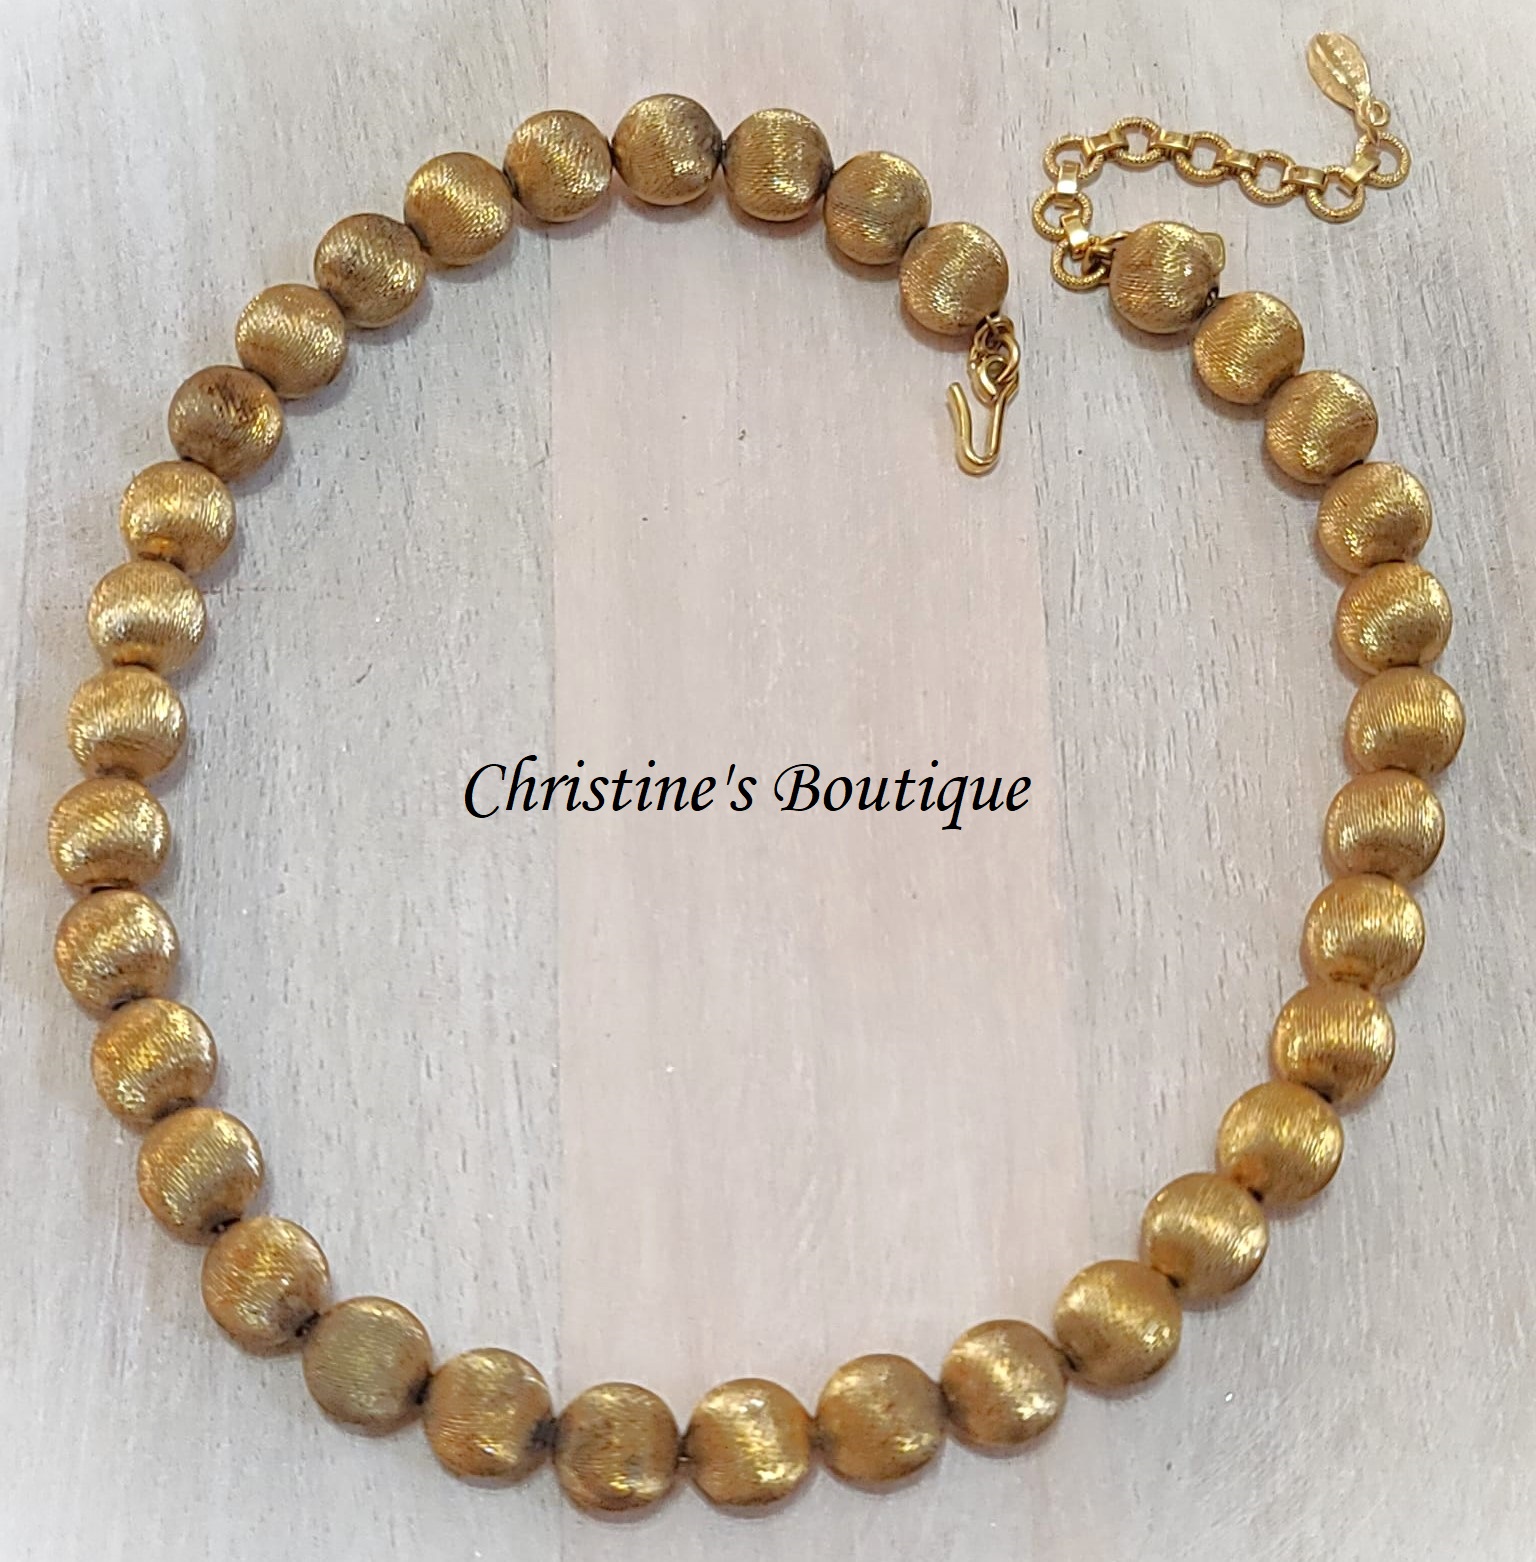 Monet Brushed Gold Bead Choker Vintage Necklace 17" - Click Image to Close